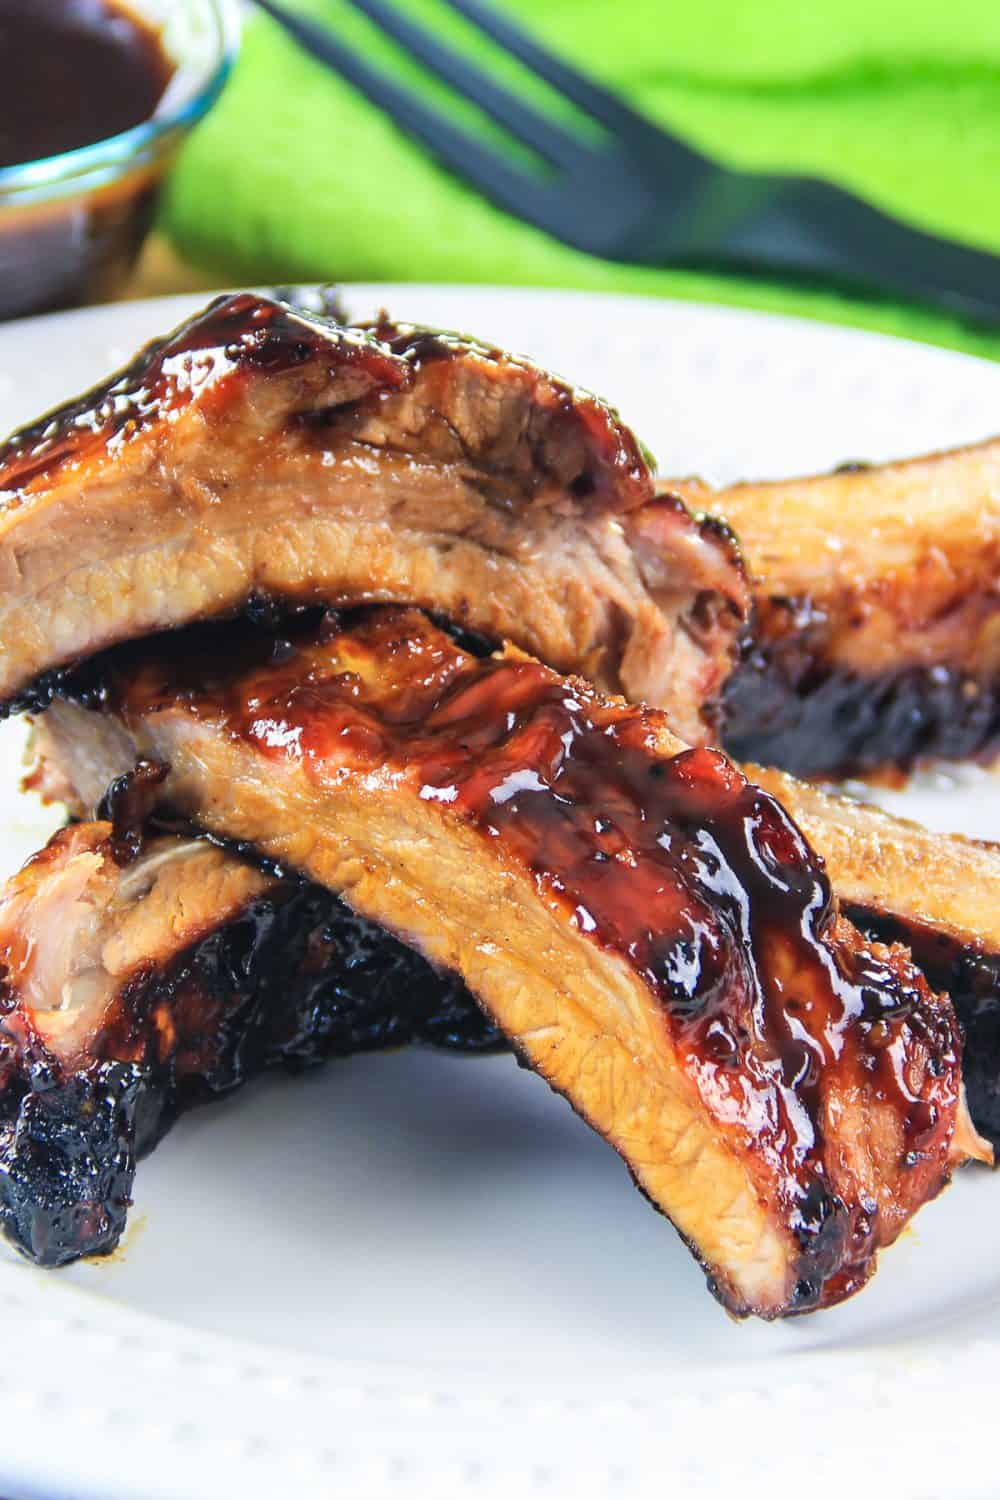 Barbecue Pork Ribs Simply Home Cooked,What Is Truffle Aioli